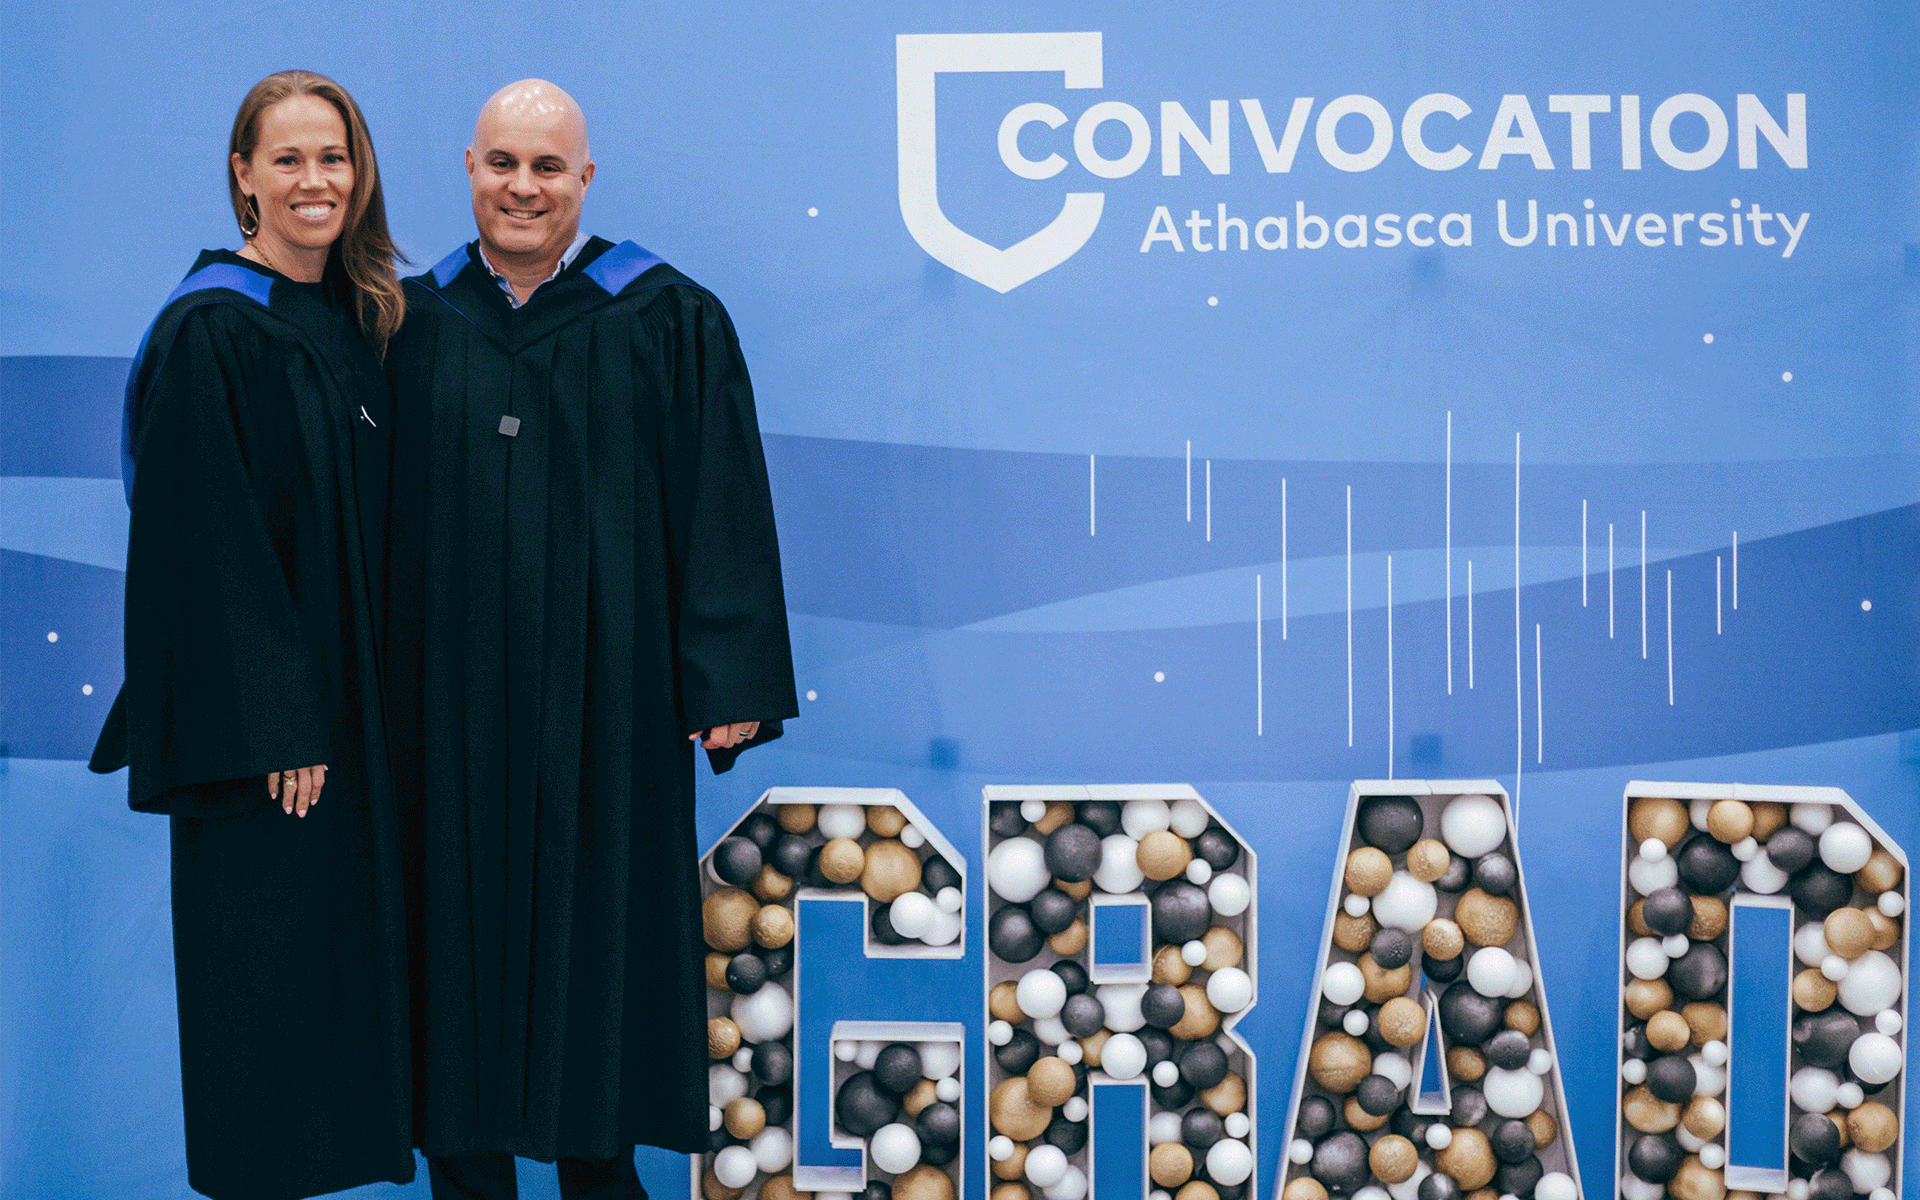 a man and woman who are both graduates standing in front of a convocation sign